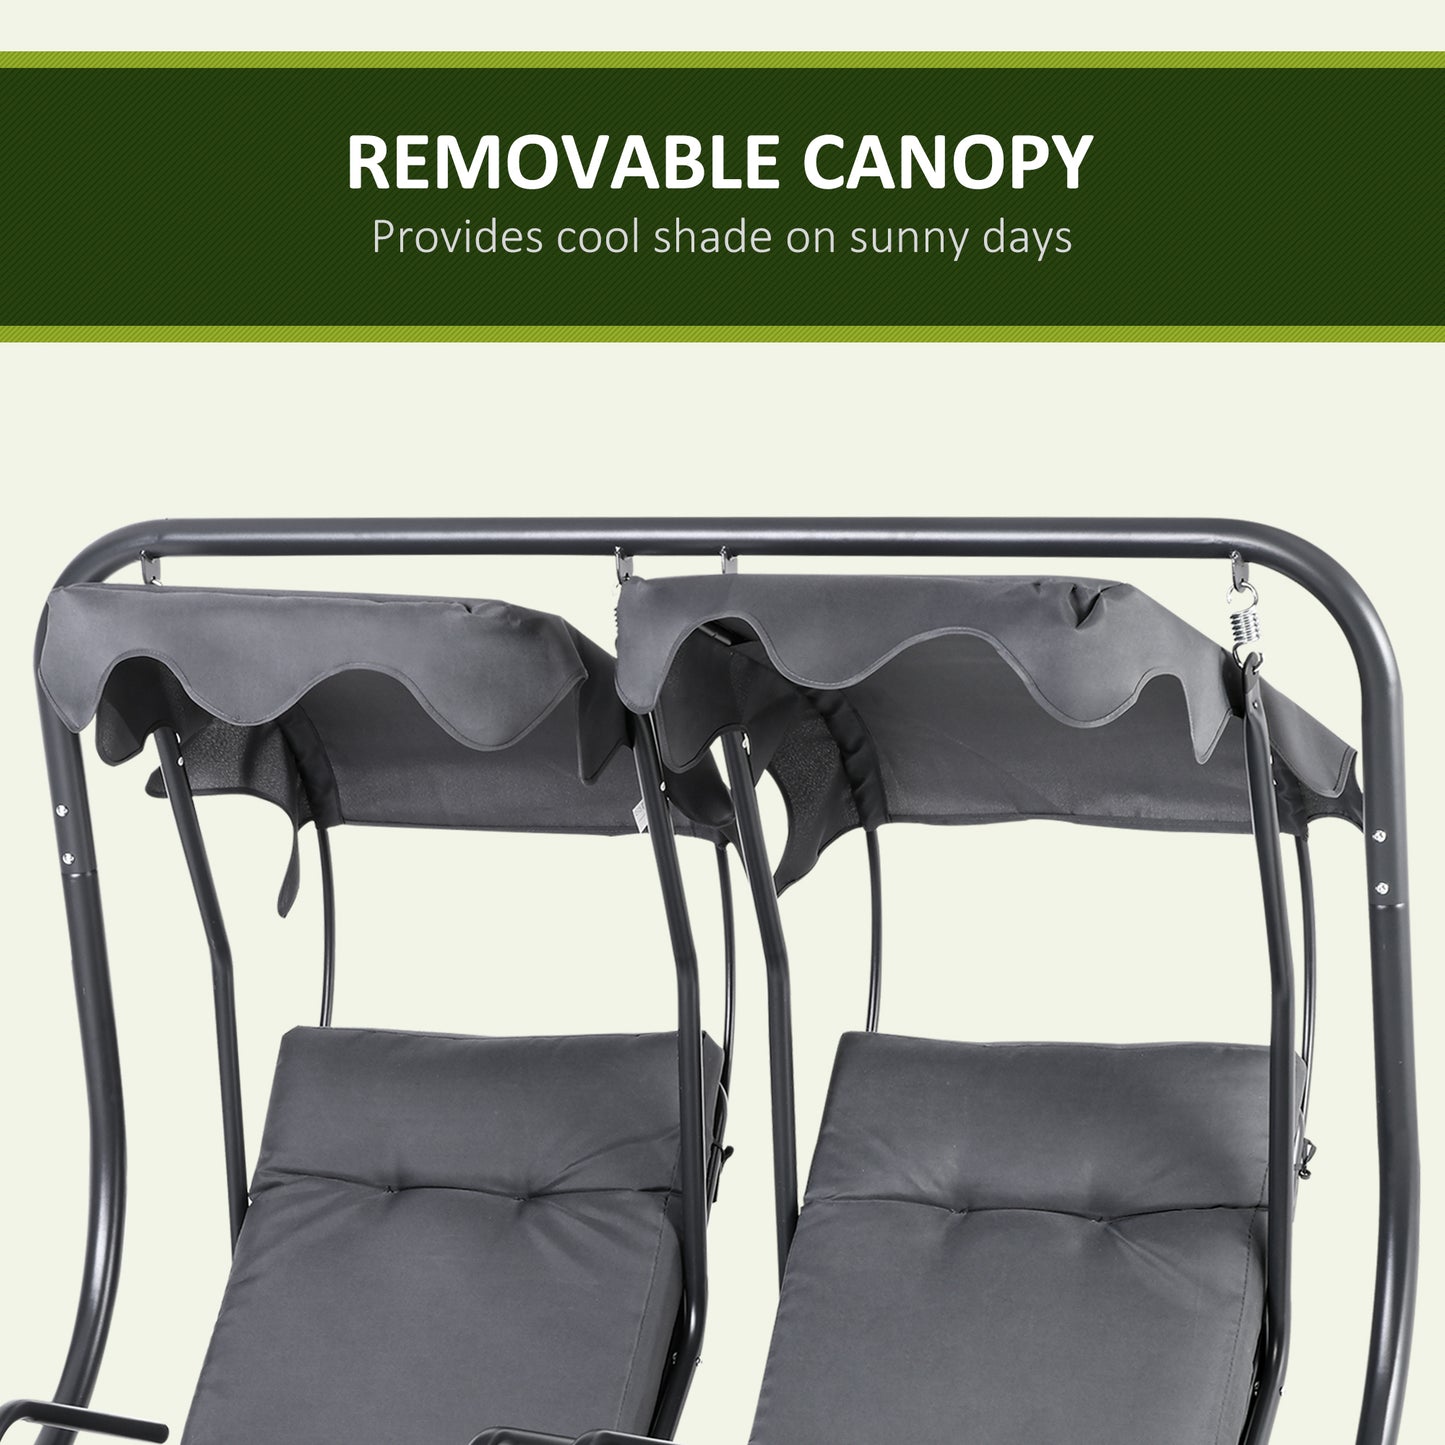 Outsunny Canopy Swing Modern Outdoor Relax Chairs w/ 2 Separate Chairs, Cushions and Removable Shade Canopy, Grey